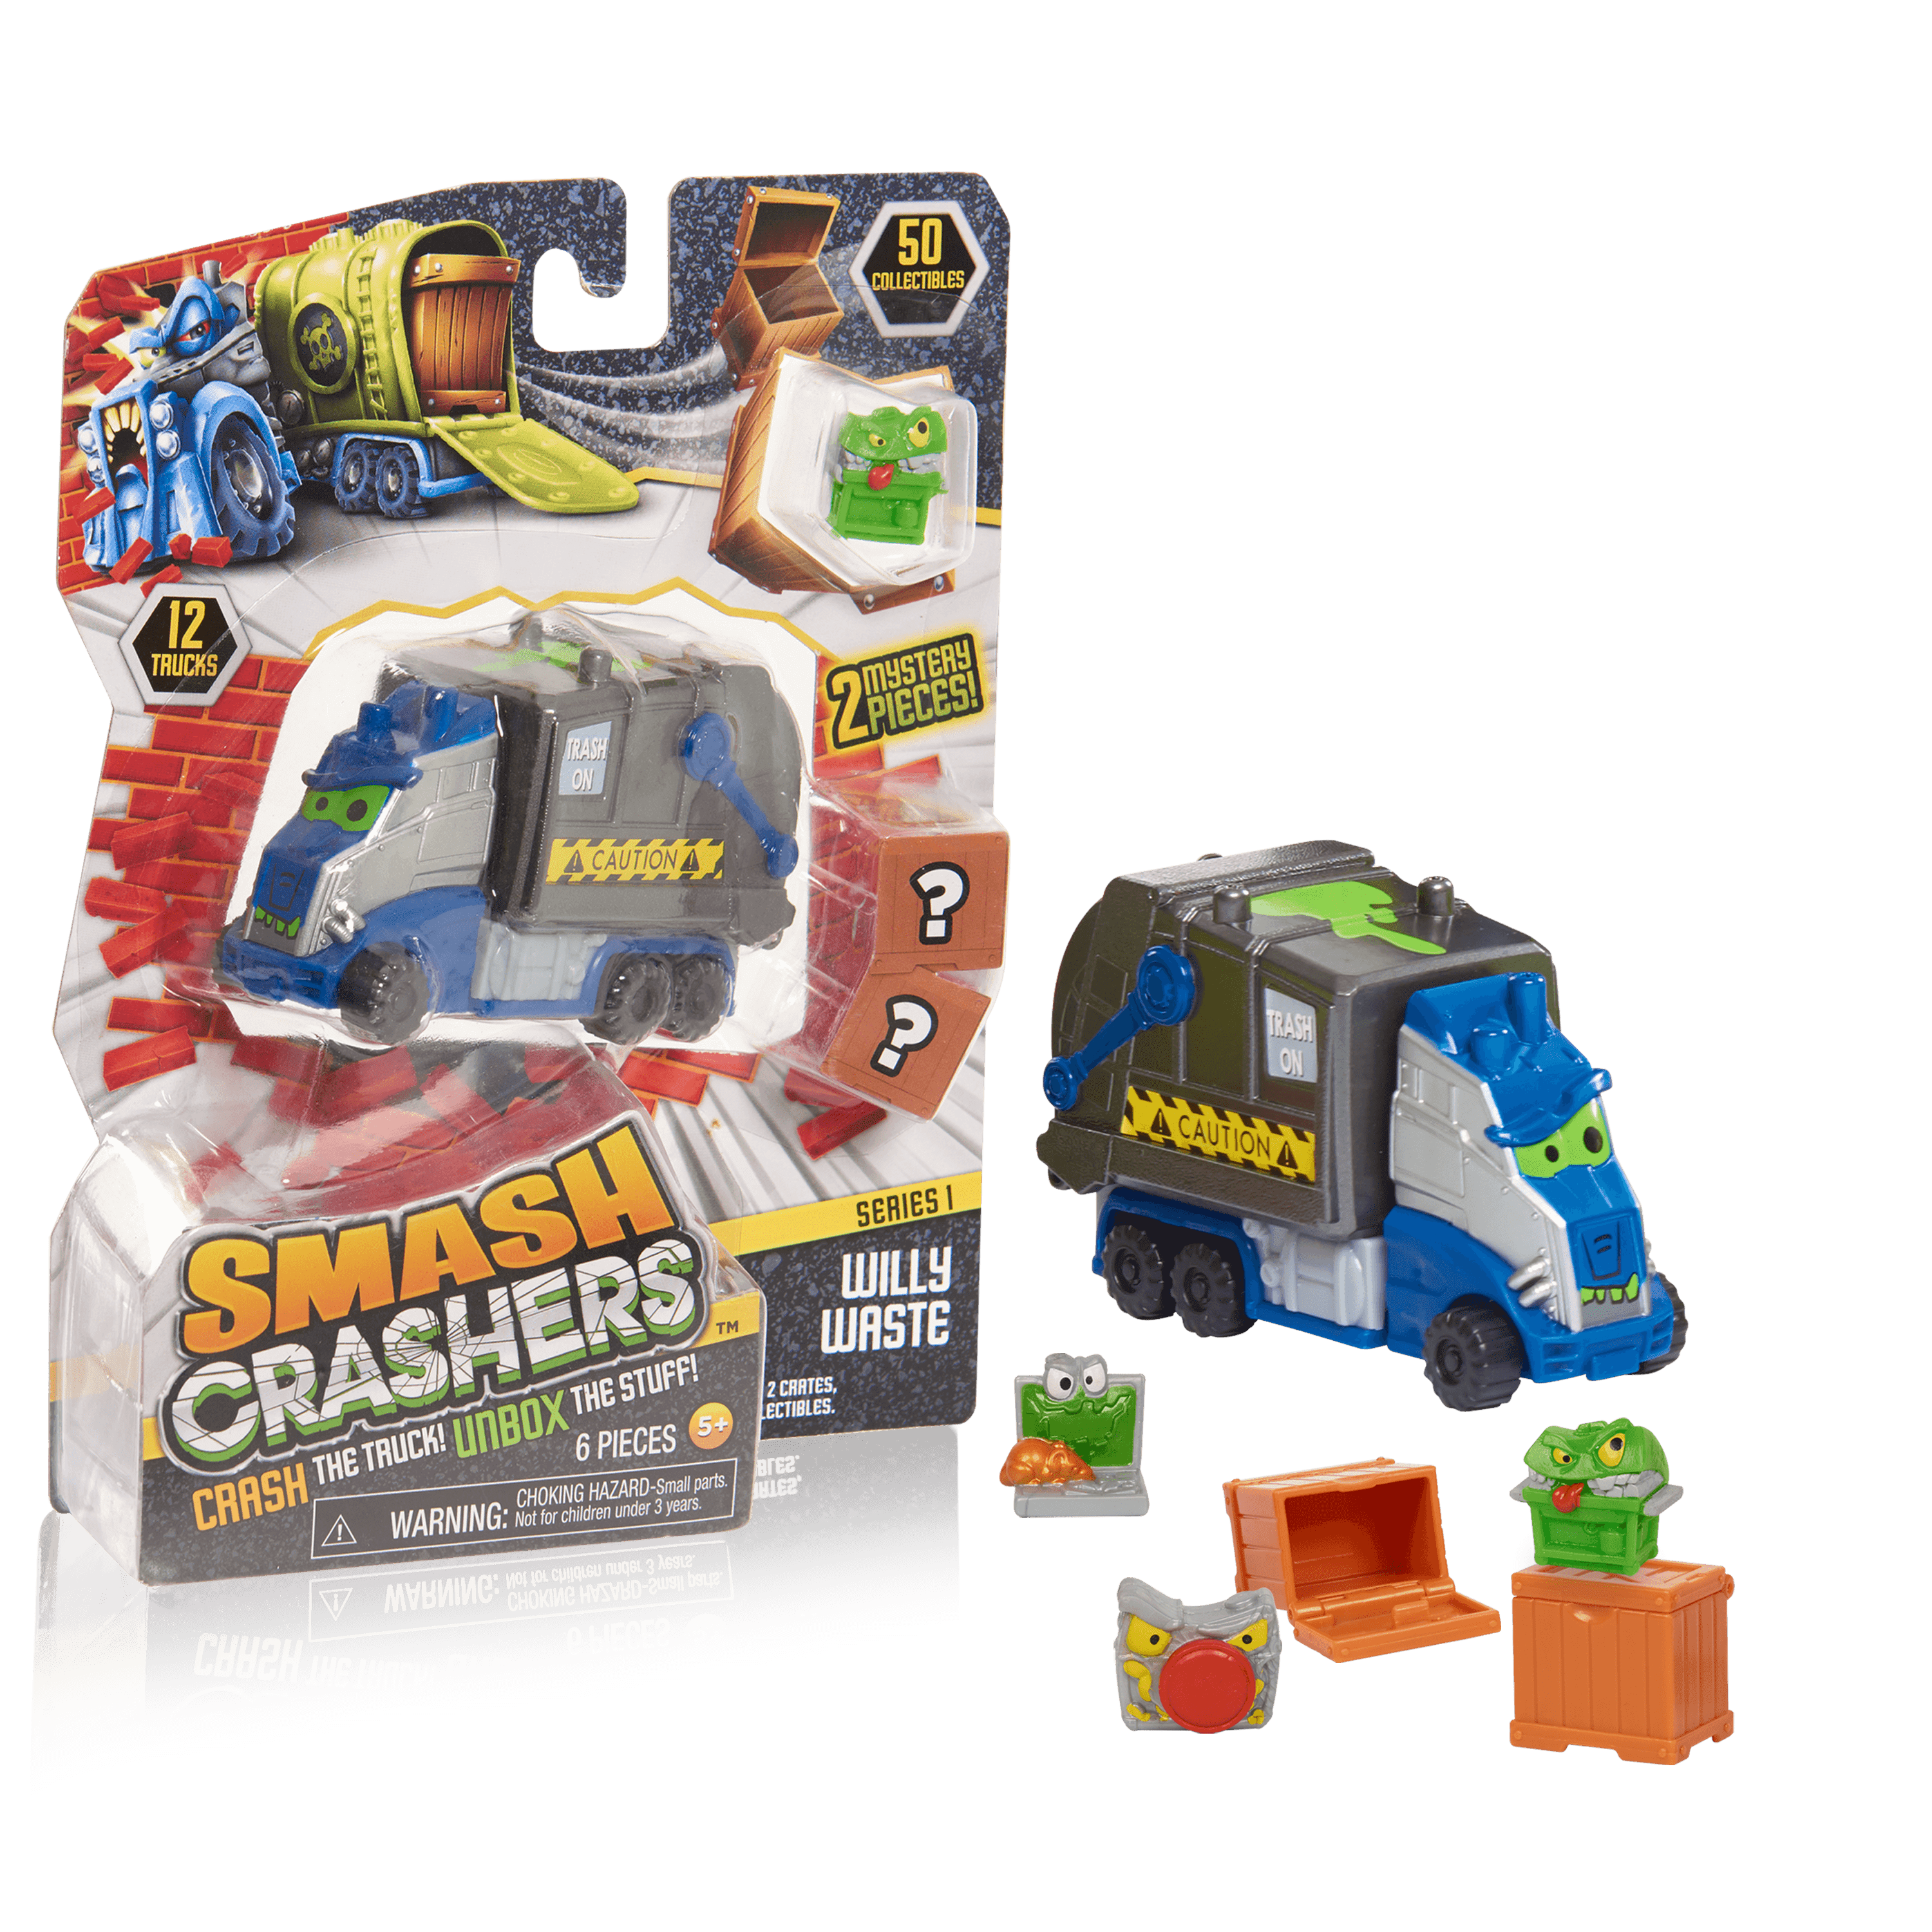 The Toy Insider on X: How many Smash Crashers vehicles are there to  collect in total? Answer to enter to win a Smash Crashers prize from  @JustPlayToys! #SmashCrashers #tweets4toys #giveaway   /